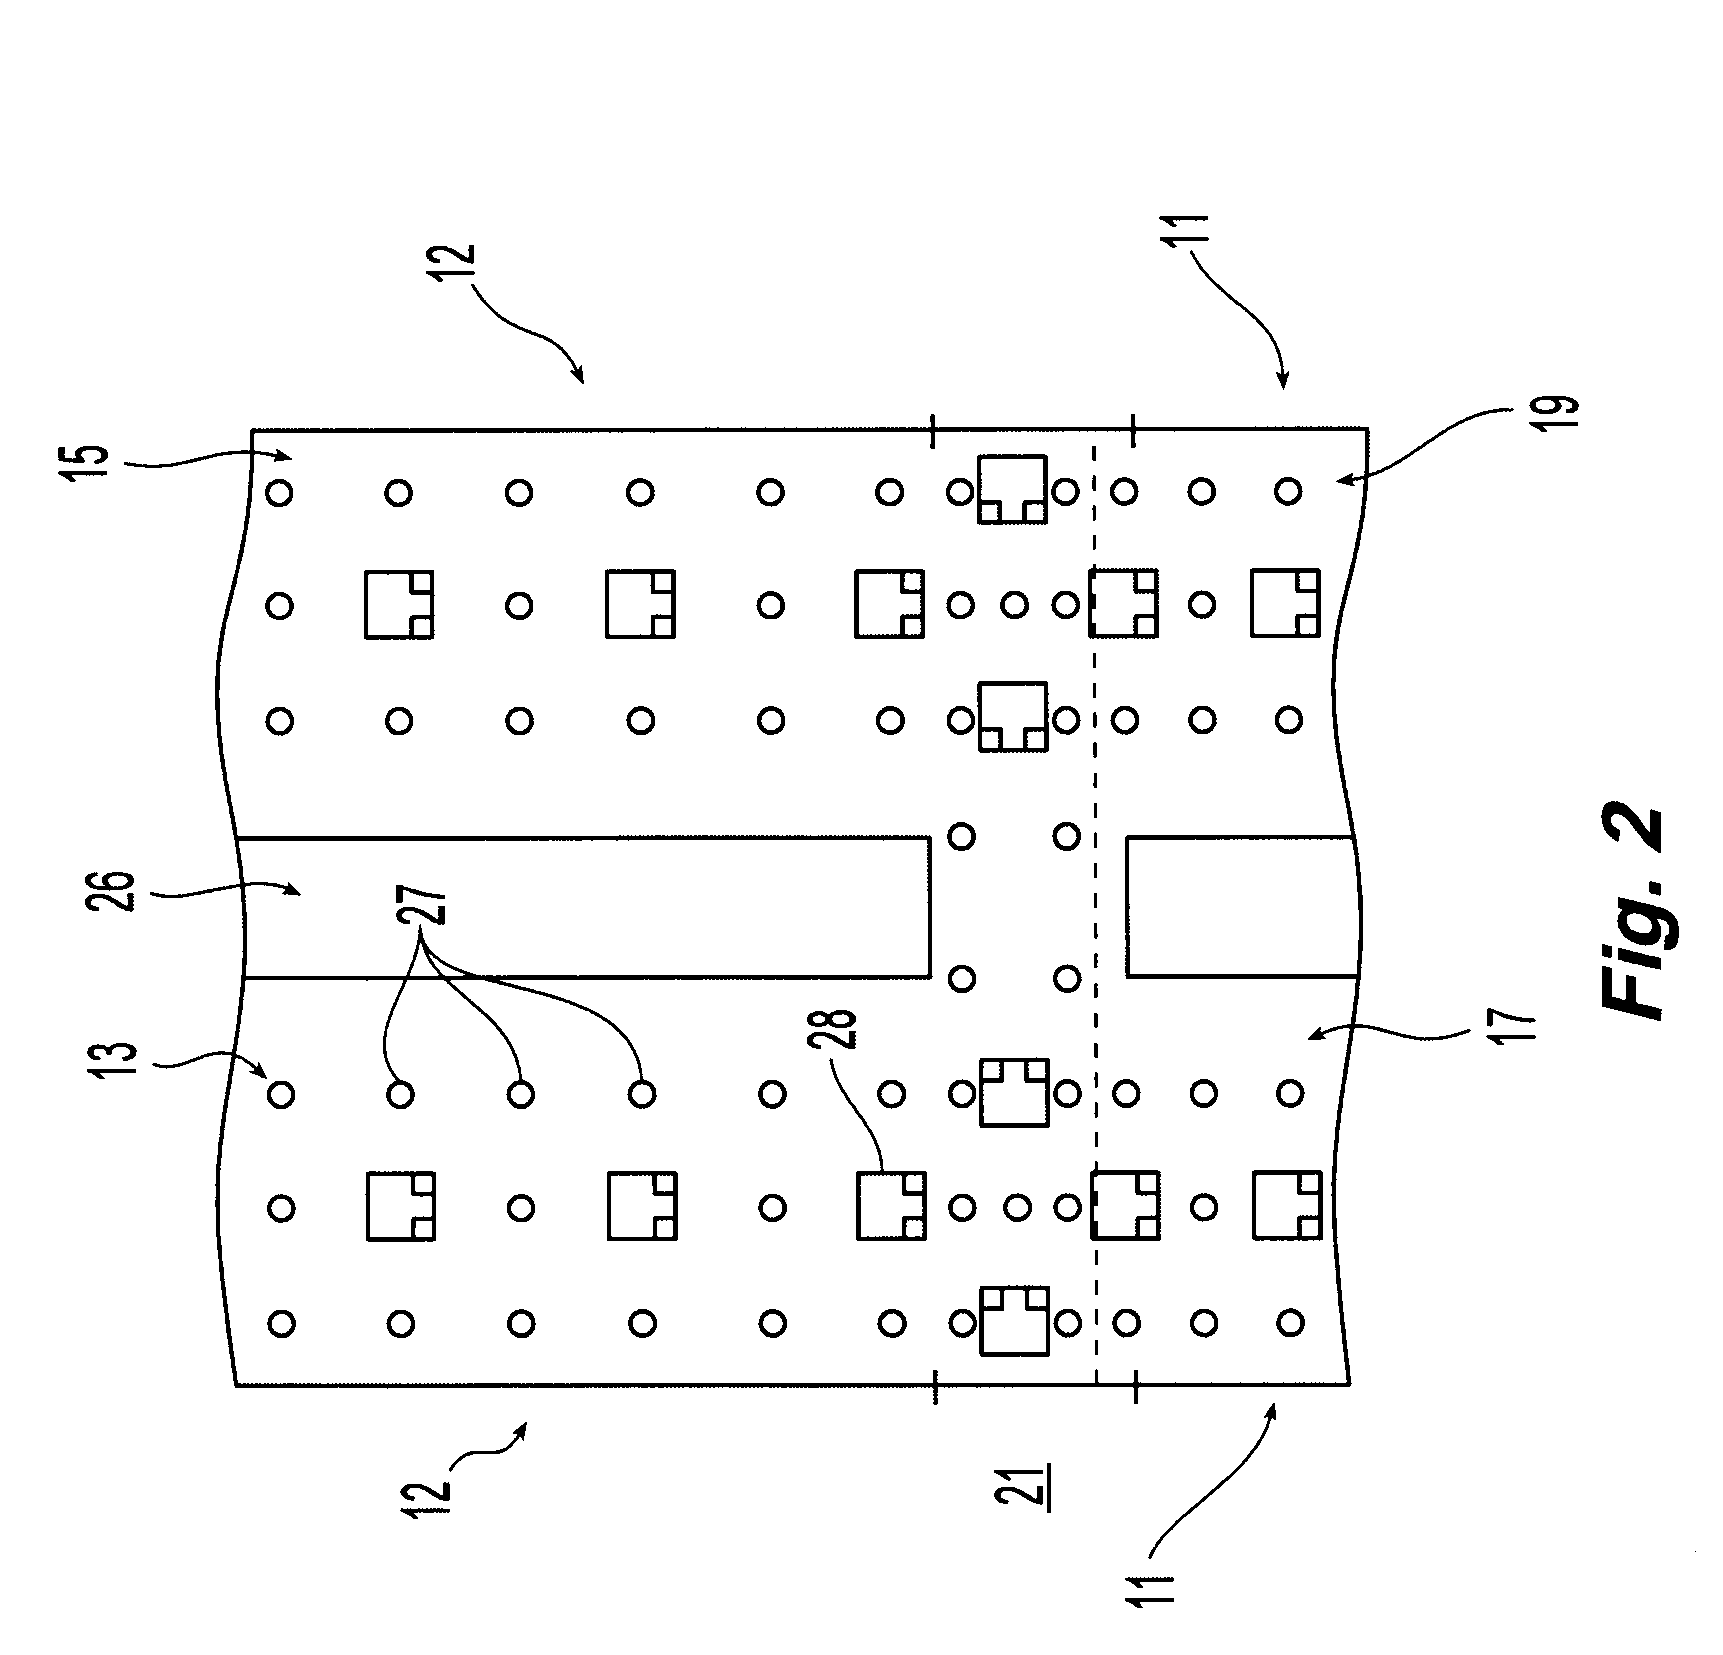 Air cargo power drive unit for detecting motion of an overlying cargo container